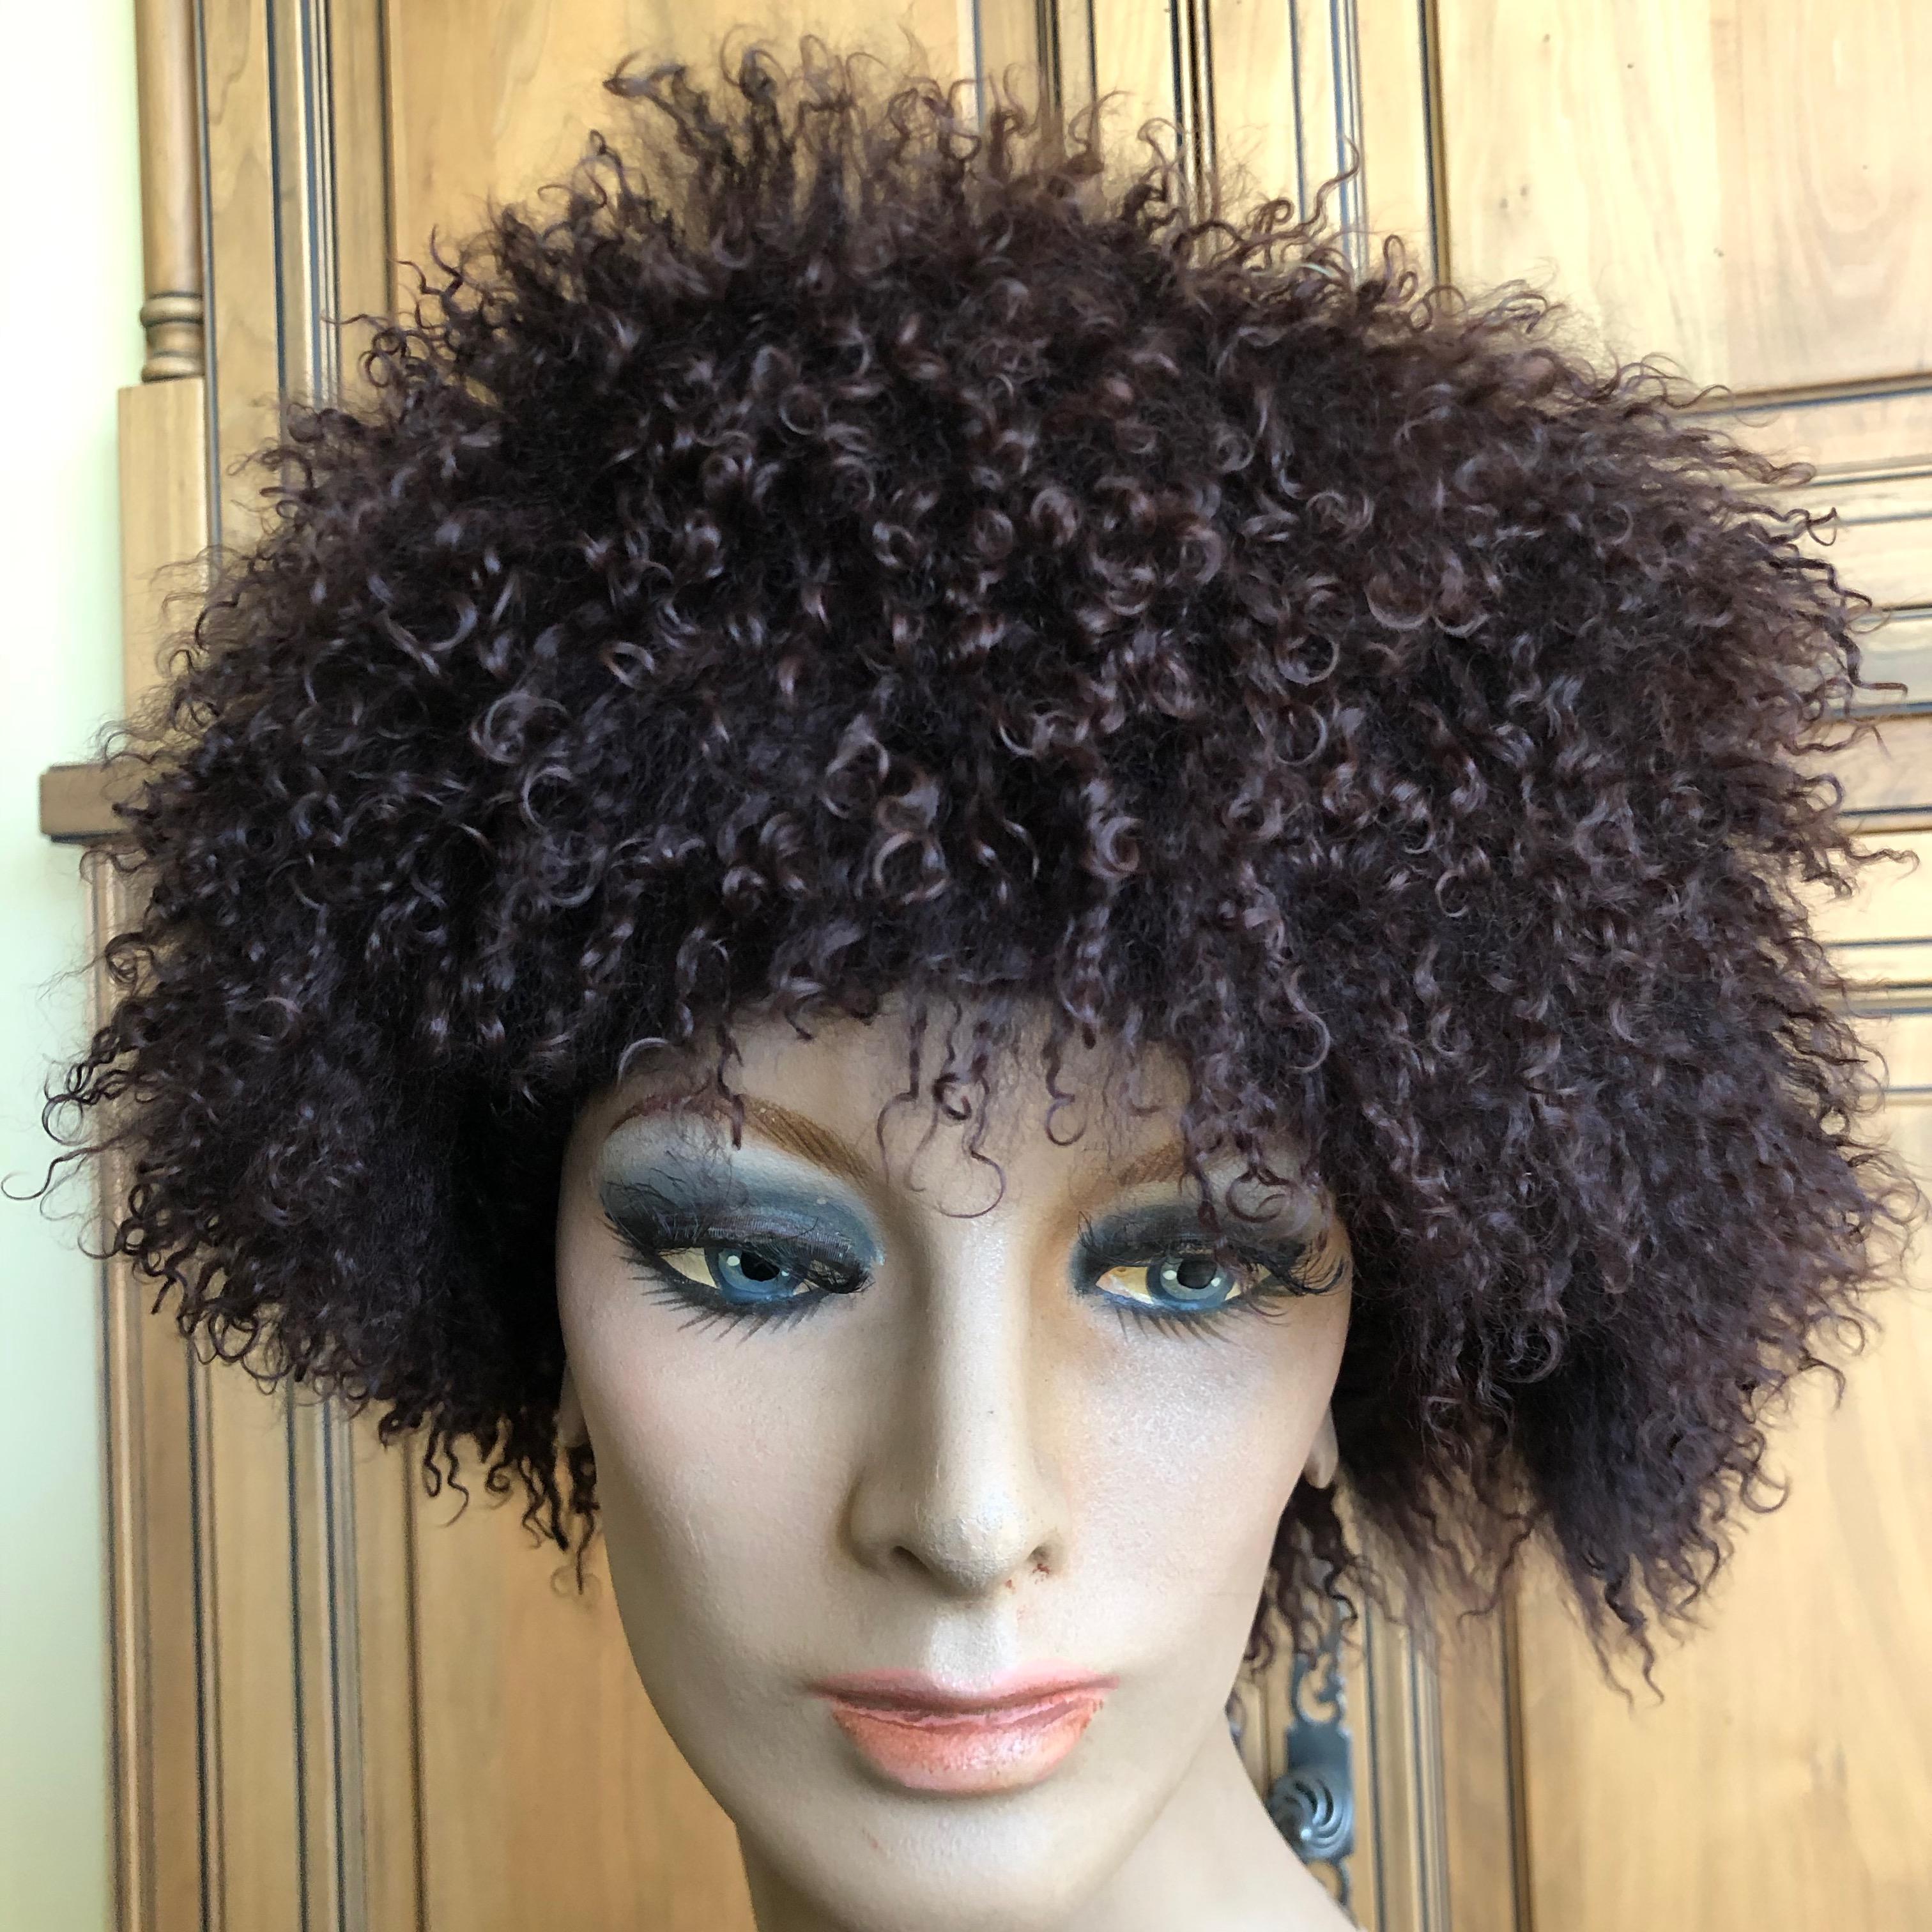 Vintage Black Curly Lamb Beret Hat from Neiman Marcus, by Karl Donahue
Size 57 or 58
In excellent condition